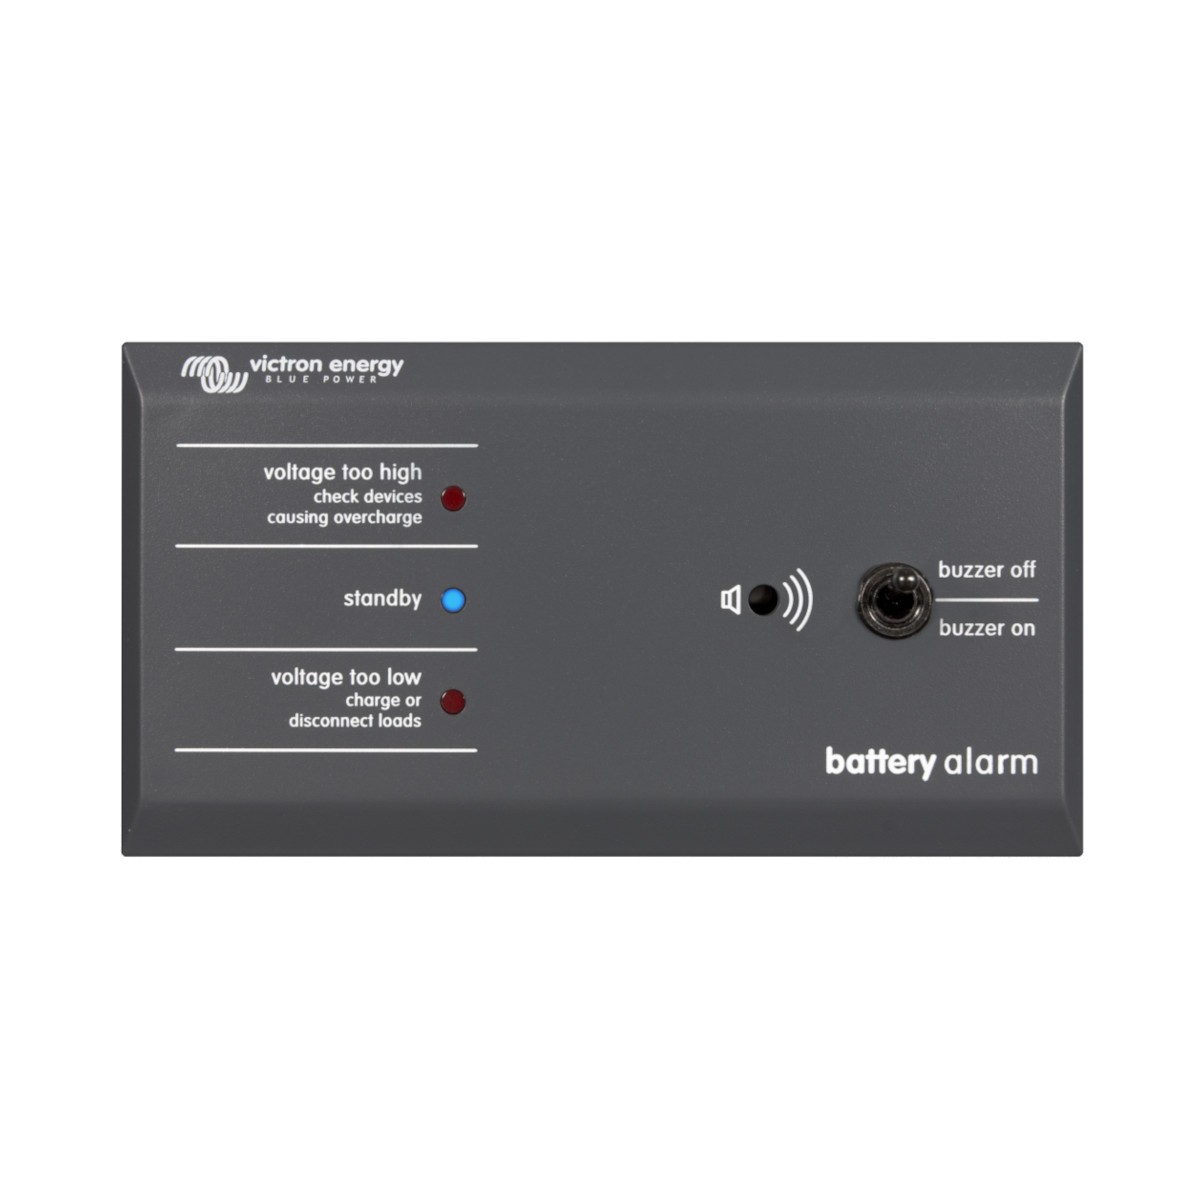 Alarm panel GX for Victron Energy batteries